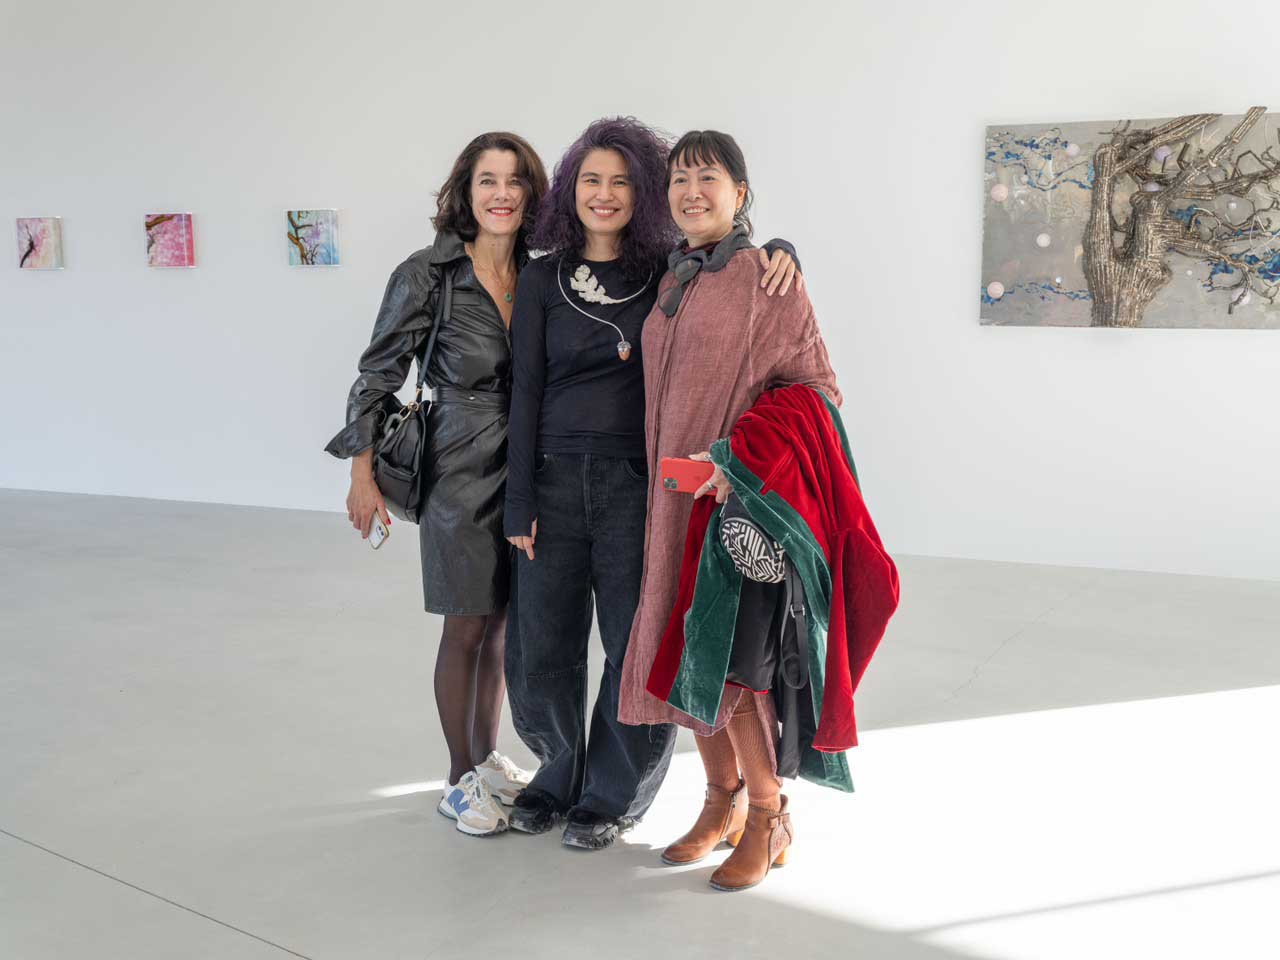 Vietnamese artist Tia-Thuy Nguyen (C) poses for a group photo with two visitors